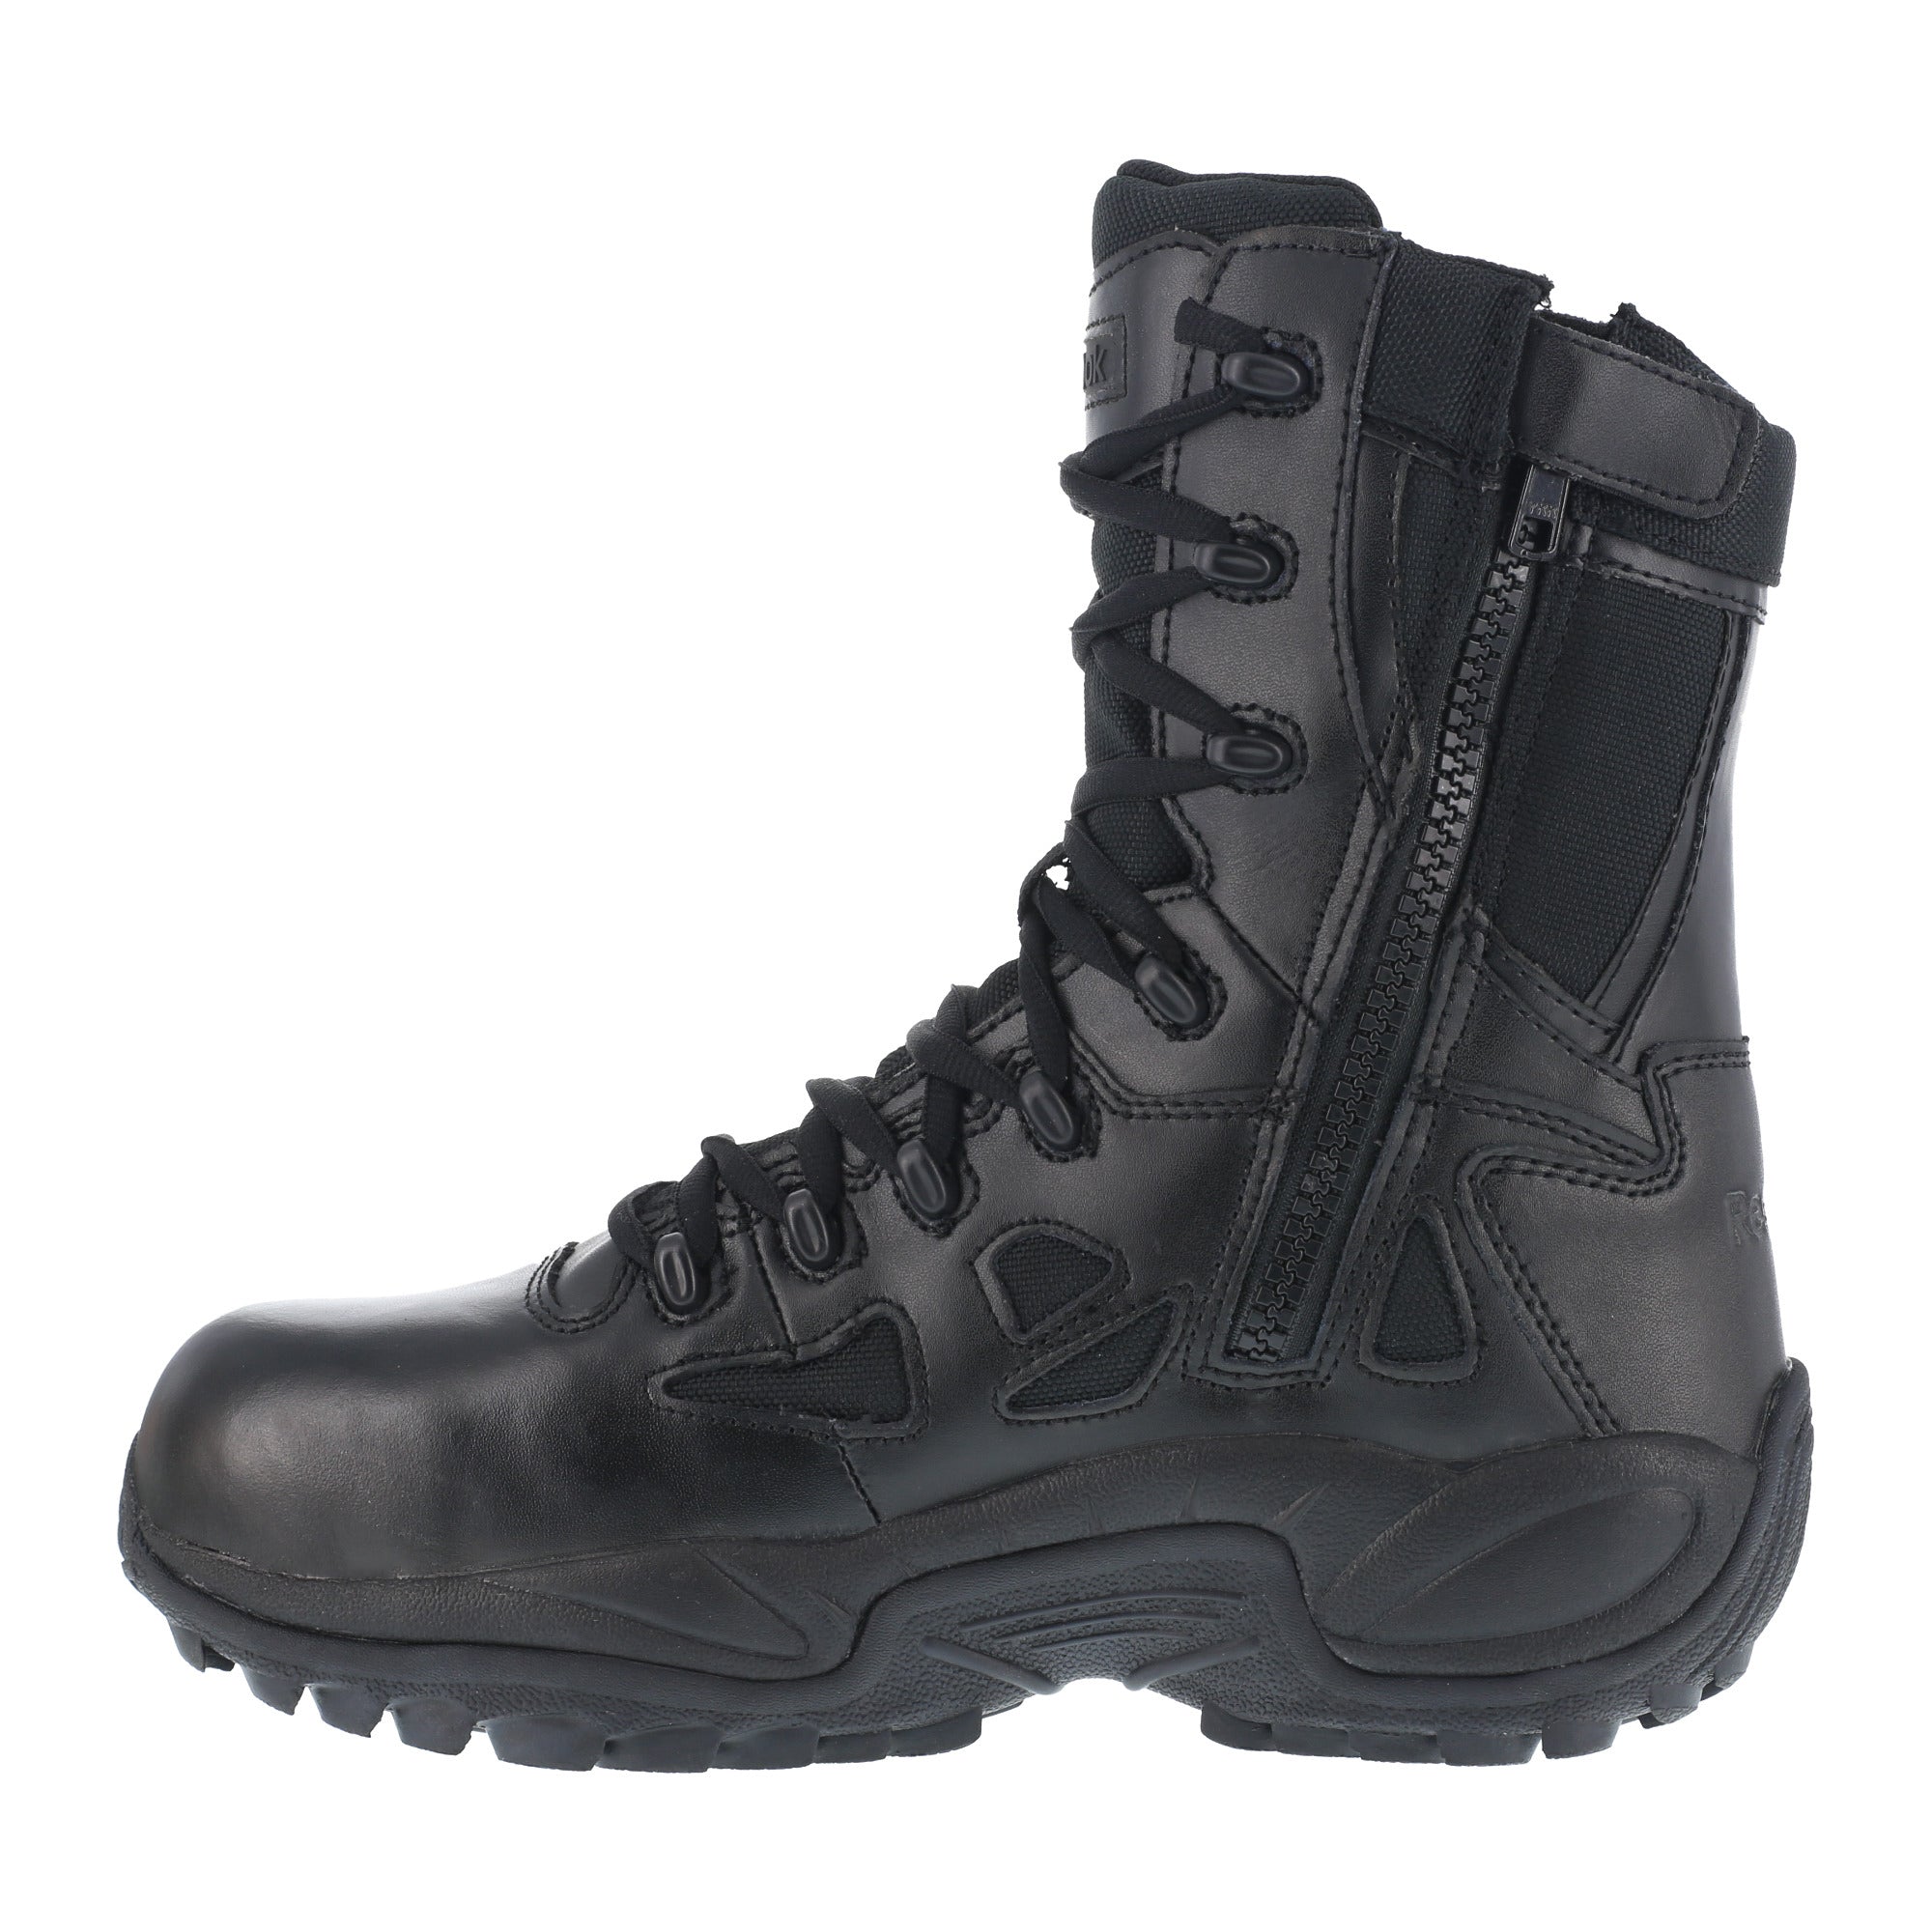 Reebok Mens Black Leather Tactical Boots Rapid Response RB Comp Toe ...